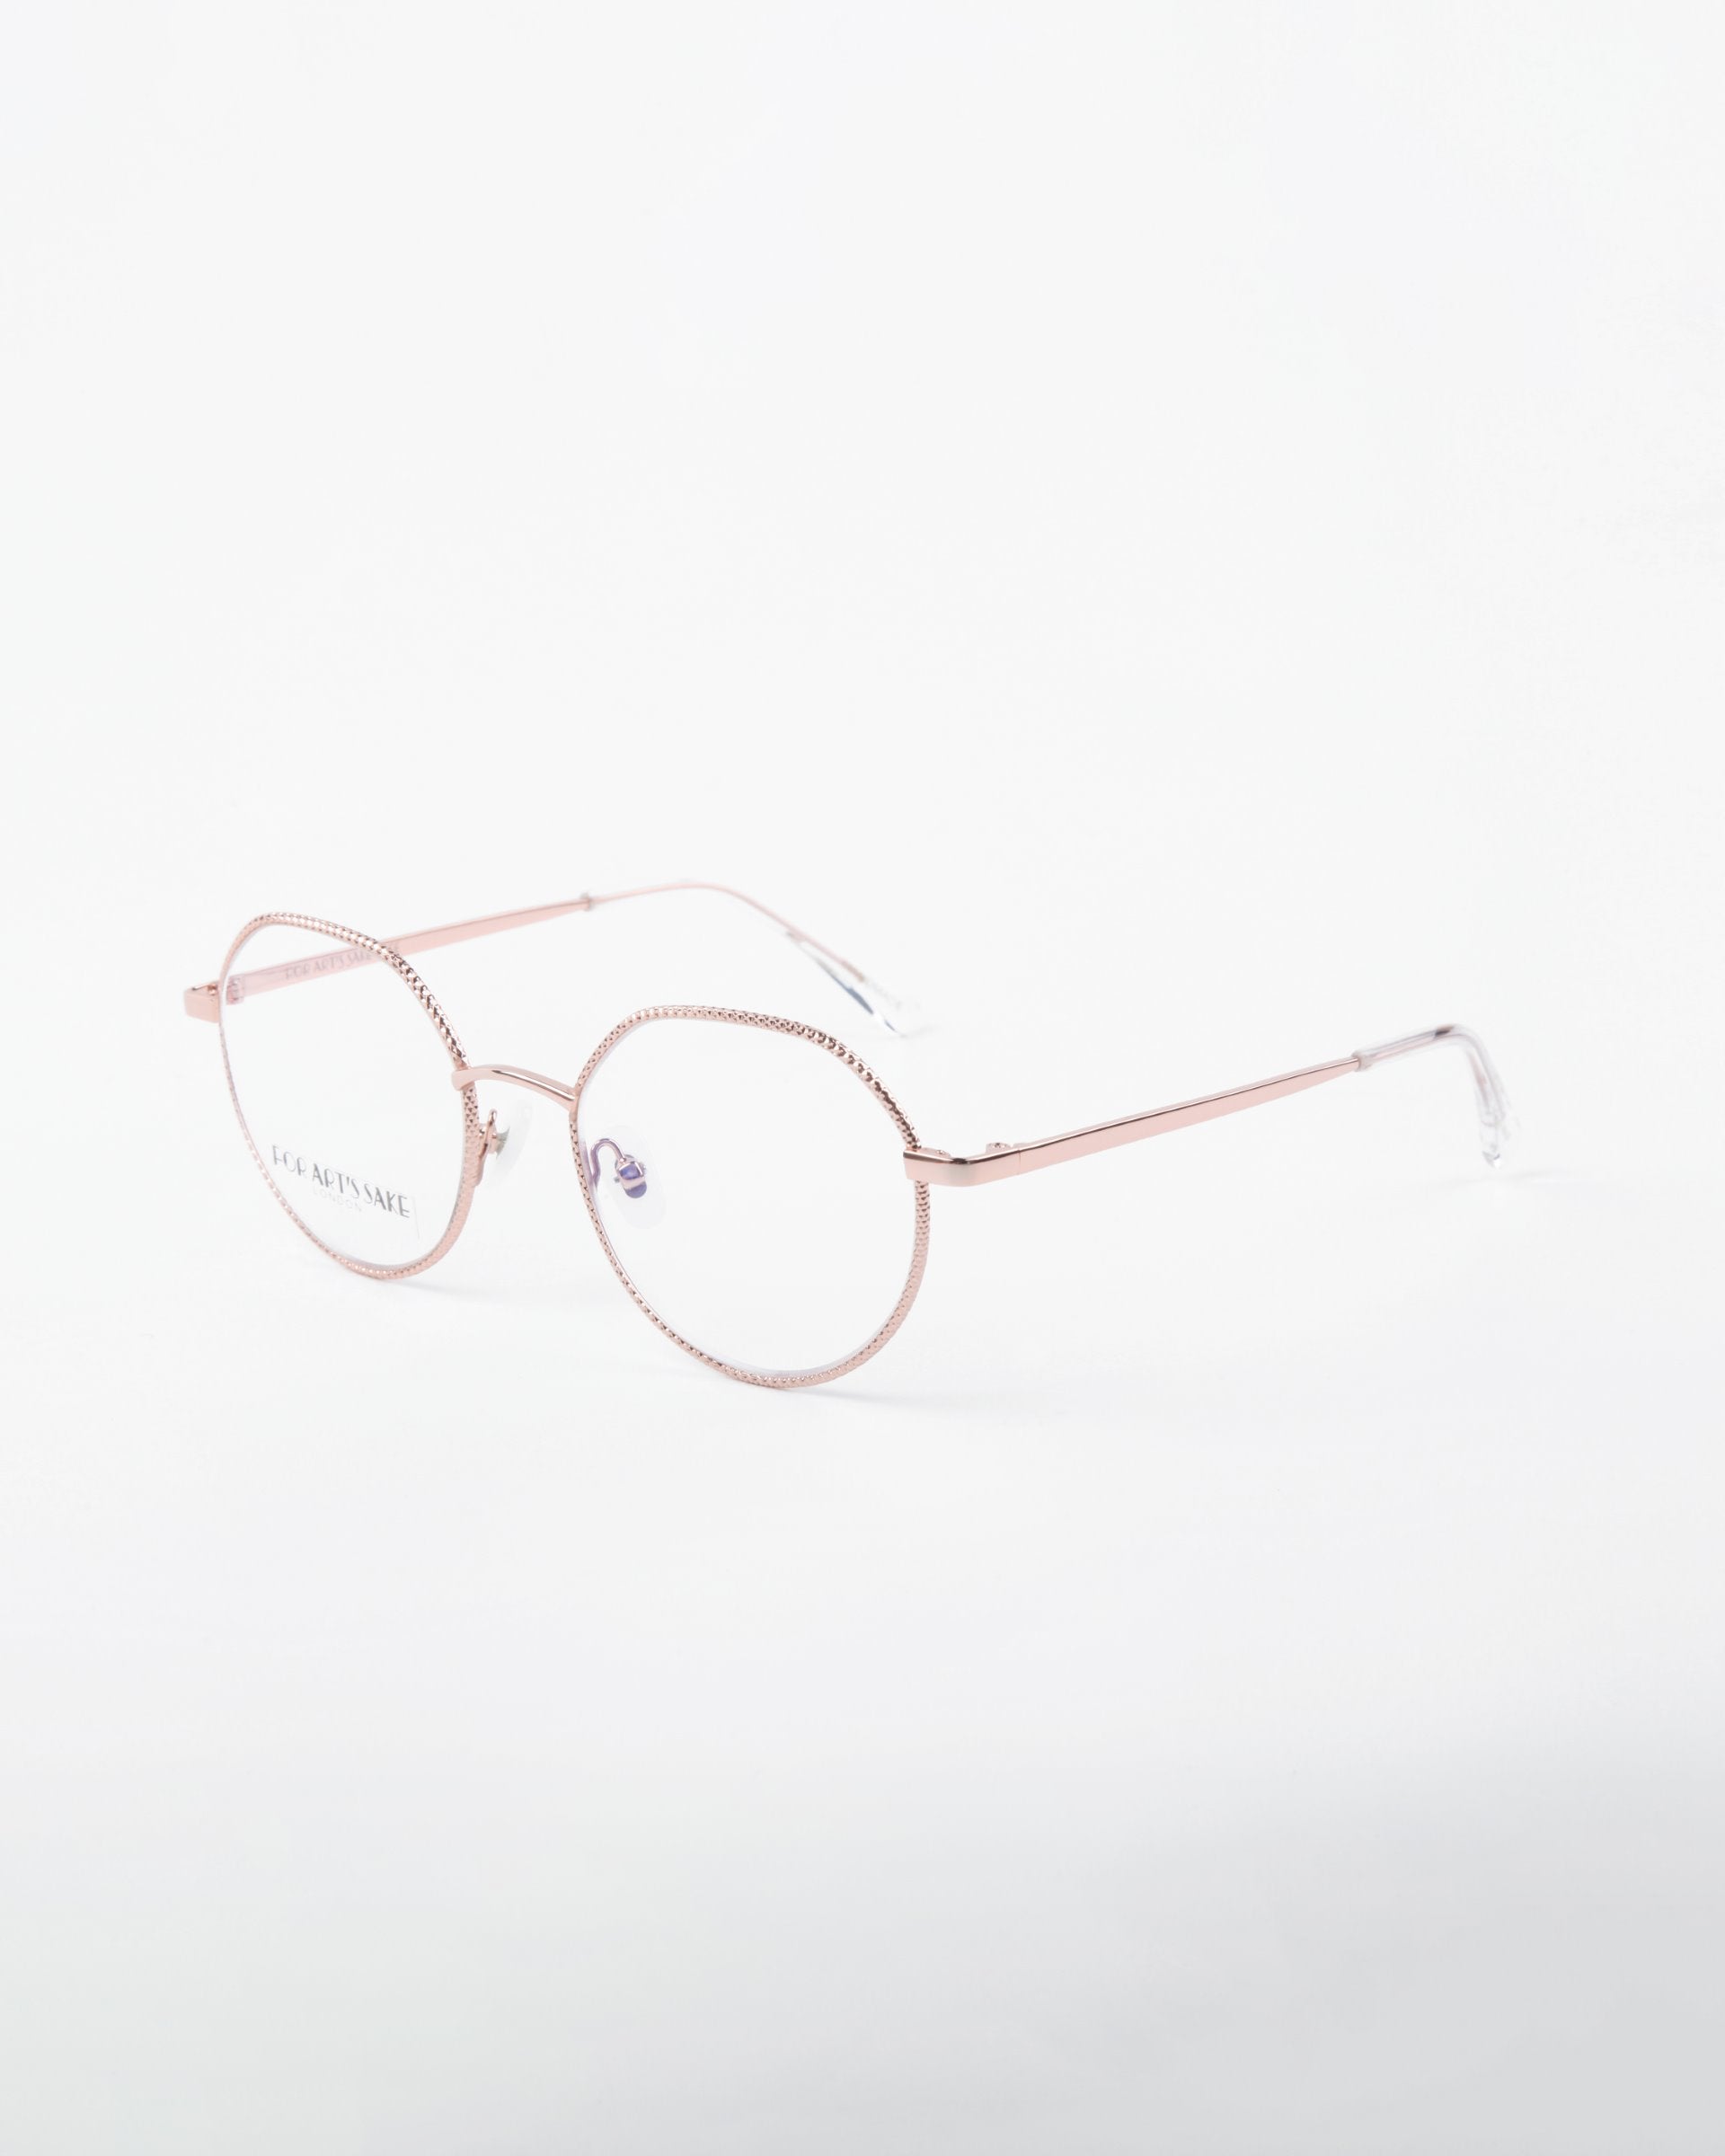 A pair of round, 18-karat gold-plated rose-gold eyeglasses with a thin metallic frame and transparent nose pads from For Art&#39;s Sake®, named Hope. The glasses are set against a white background, providing a clear view of the delicate design and subtle detailing on the frame.